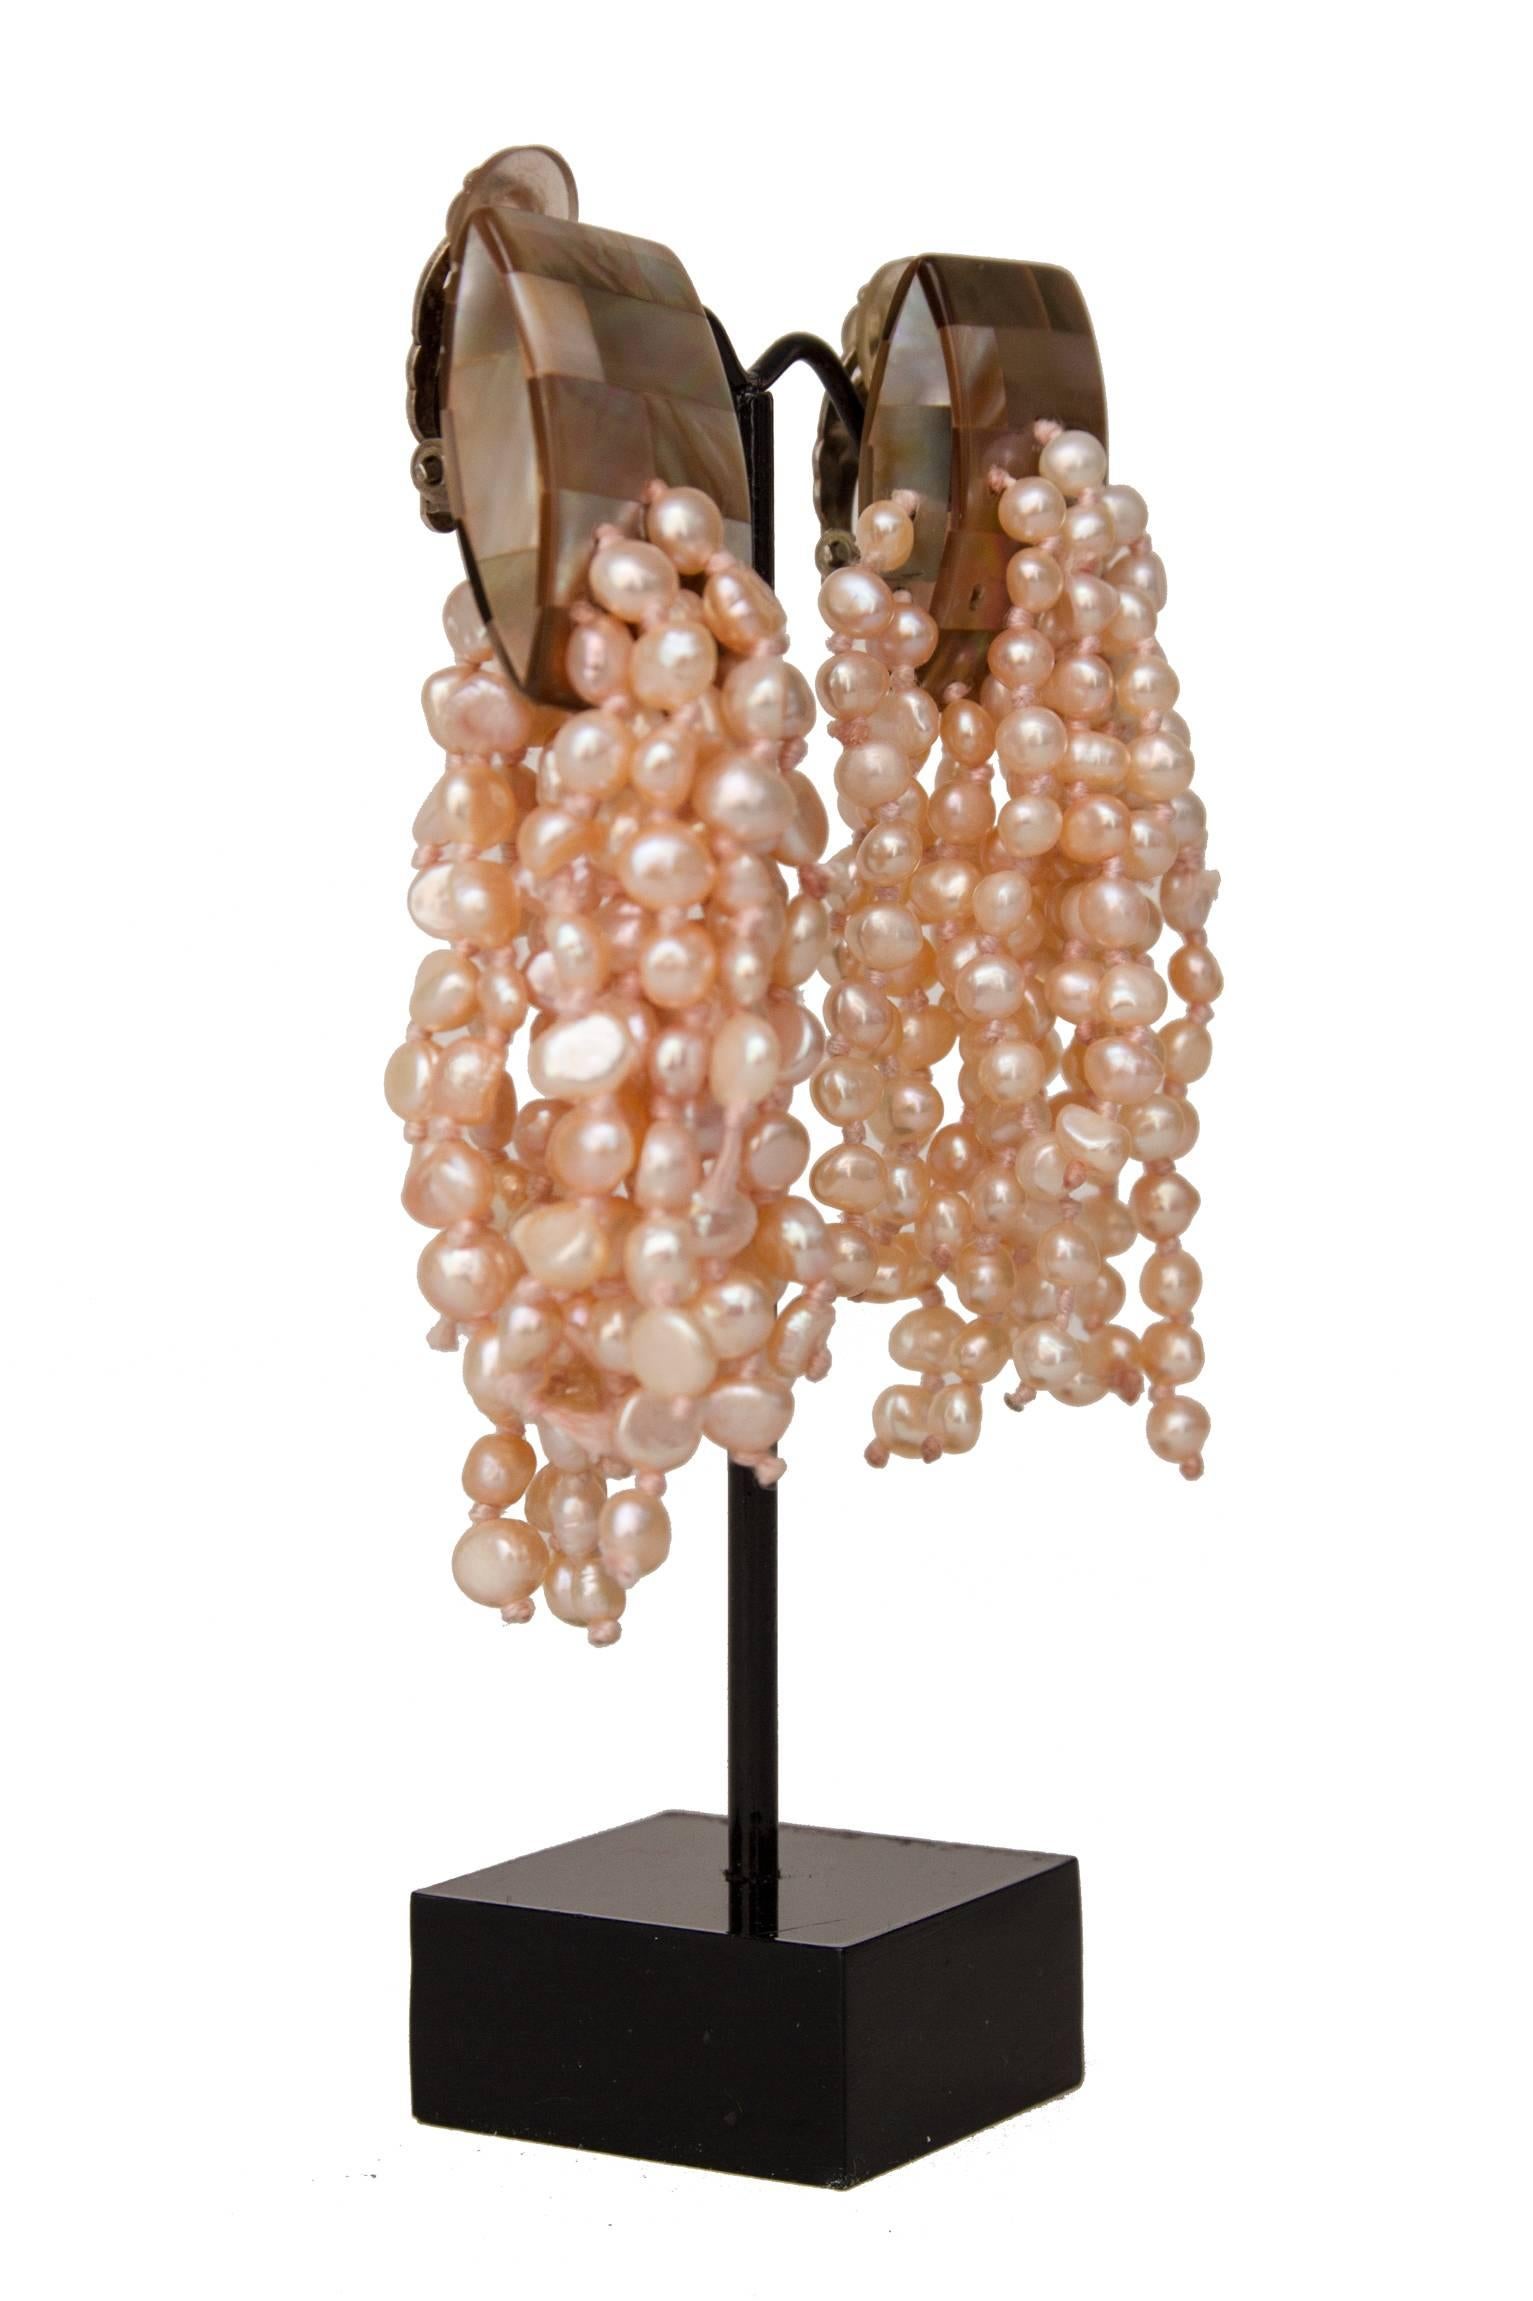 A pair of 1980s pale-pink Monies mother-of-pearl dangle clip-on earrings with a mosaic-like top and different strands of pearls attached to each earring.

The earrings are stamped: Monies 